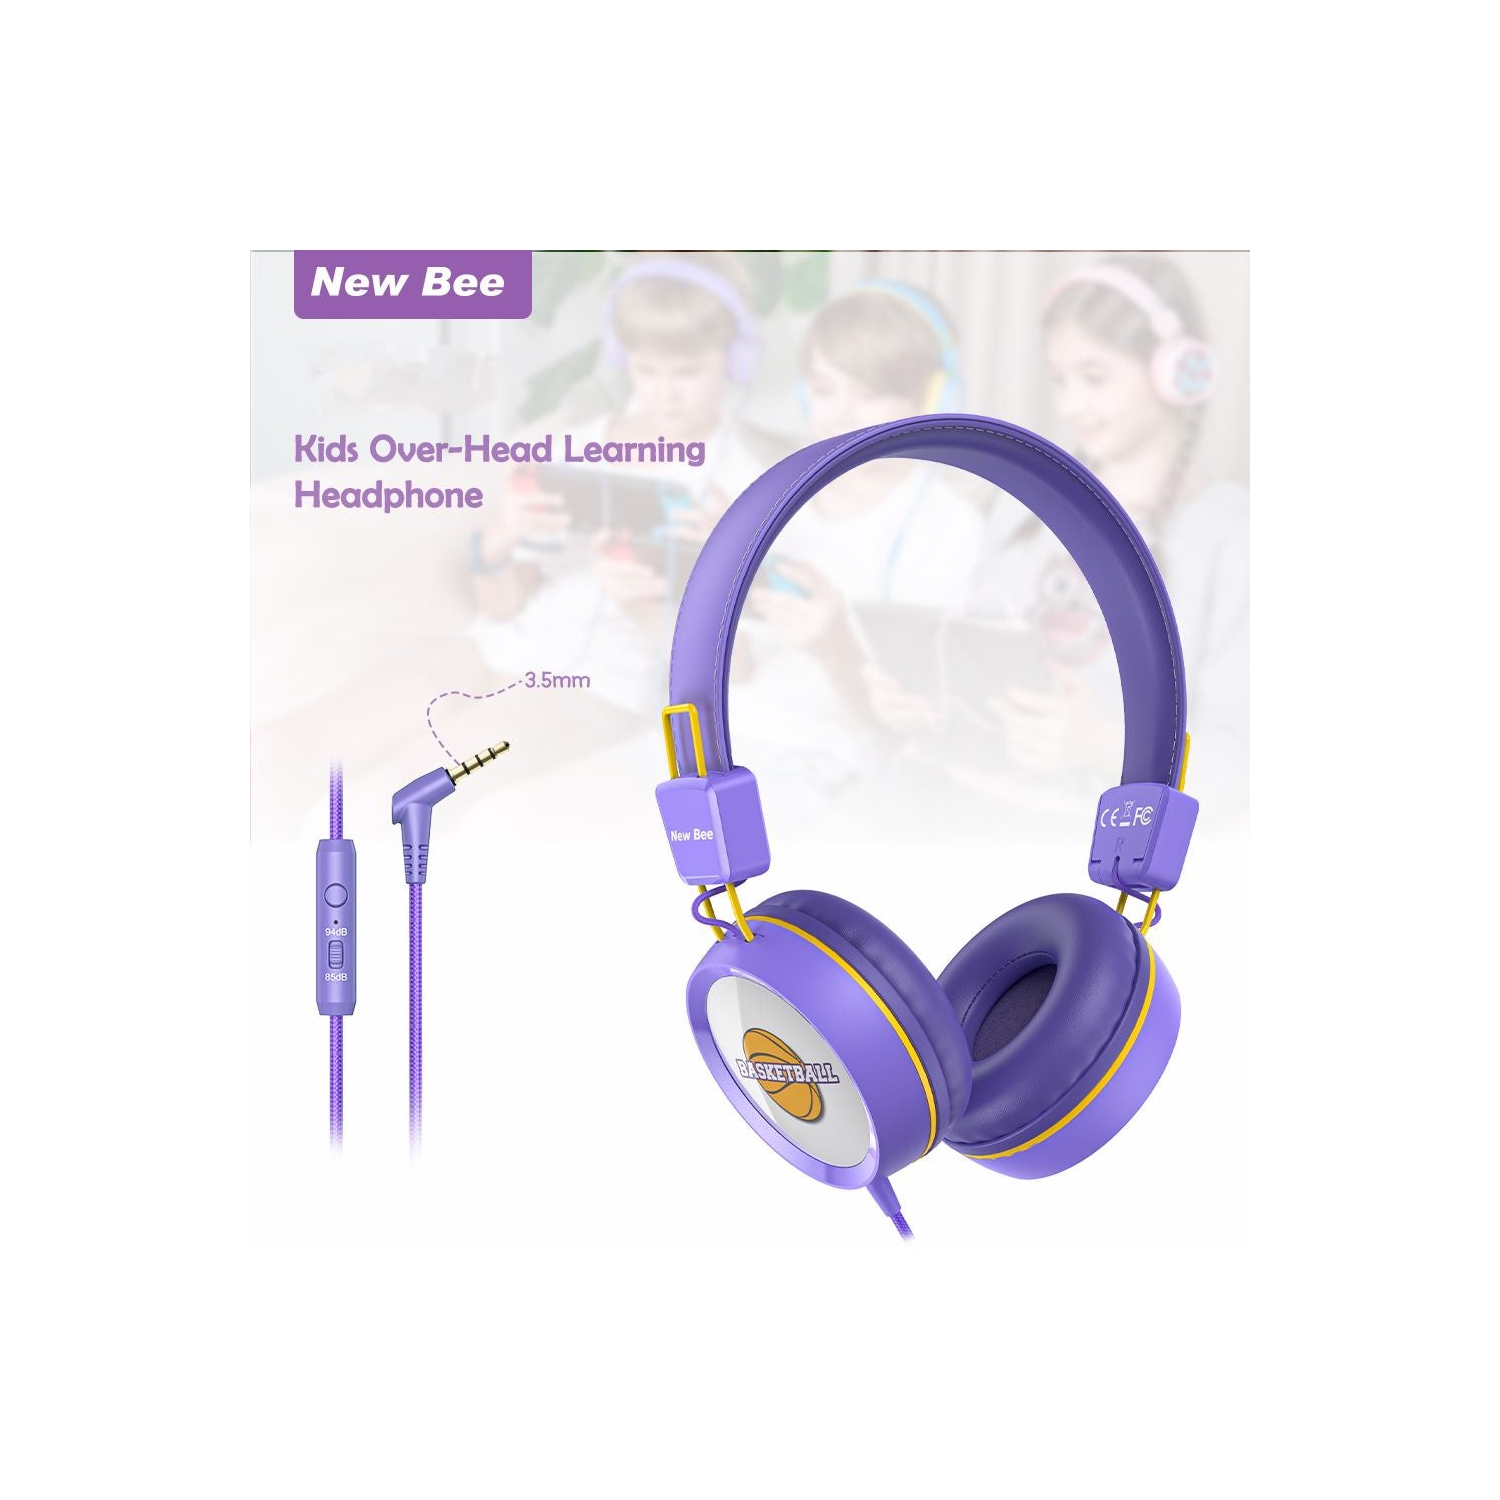 New Bee Kids Headphones with Microphone in Purple - Safe, Comfortable, and Foldable